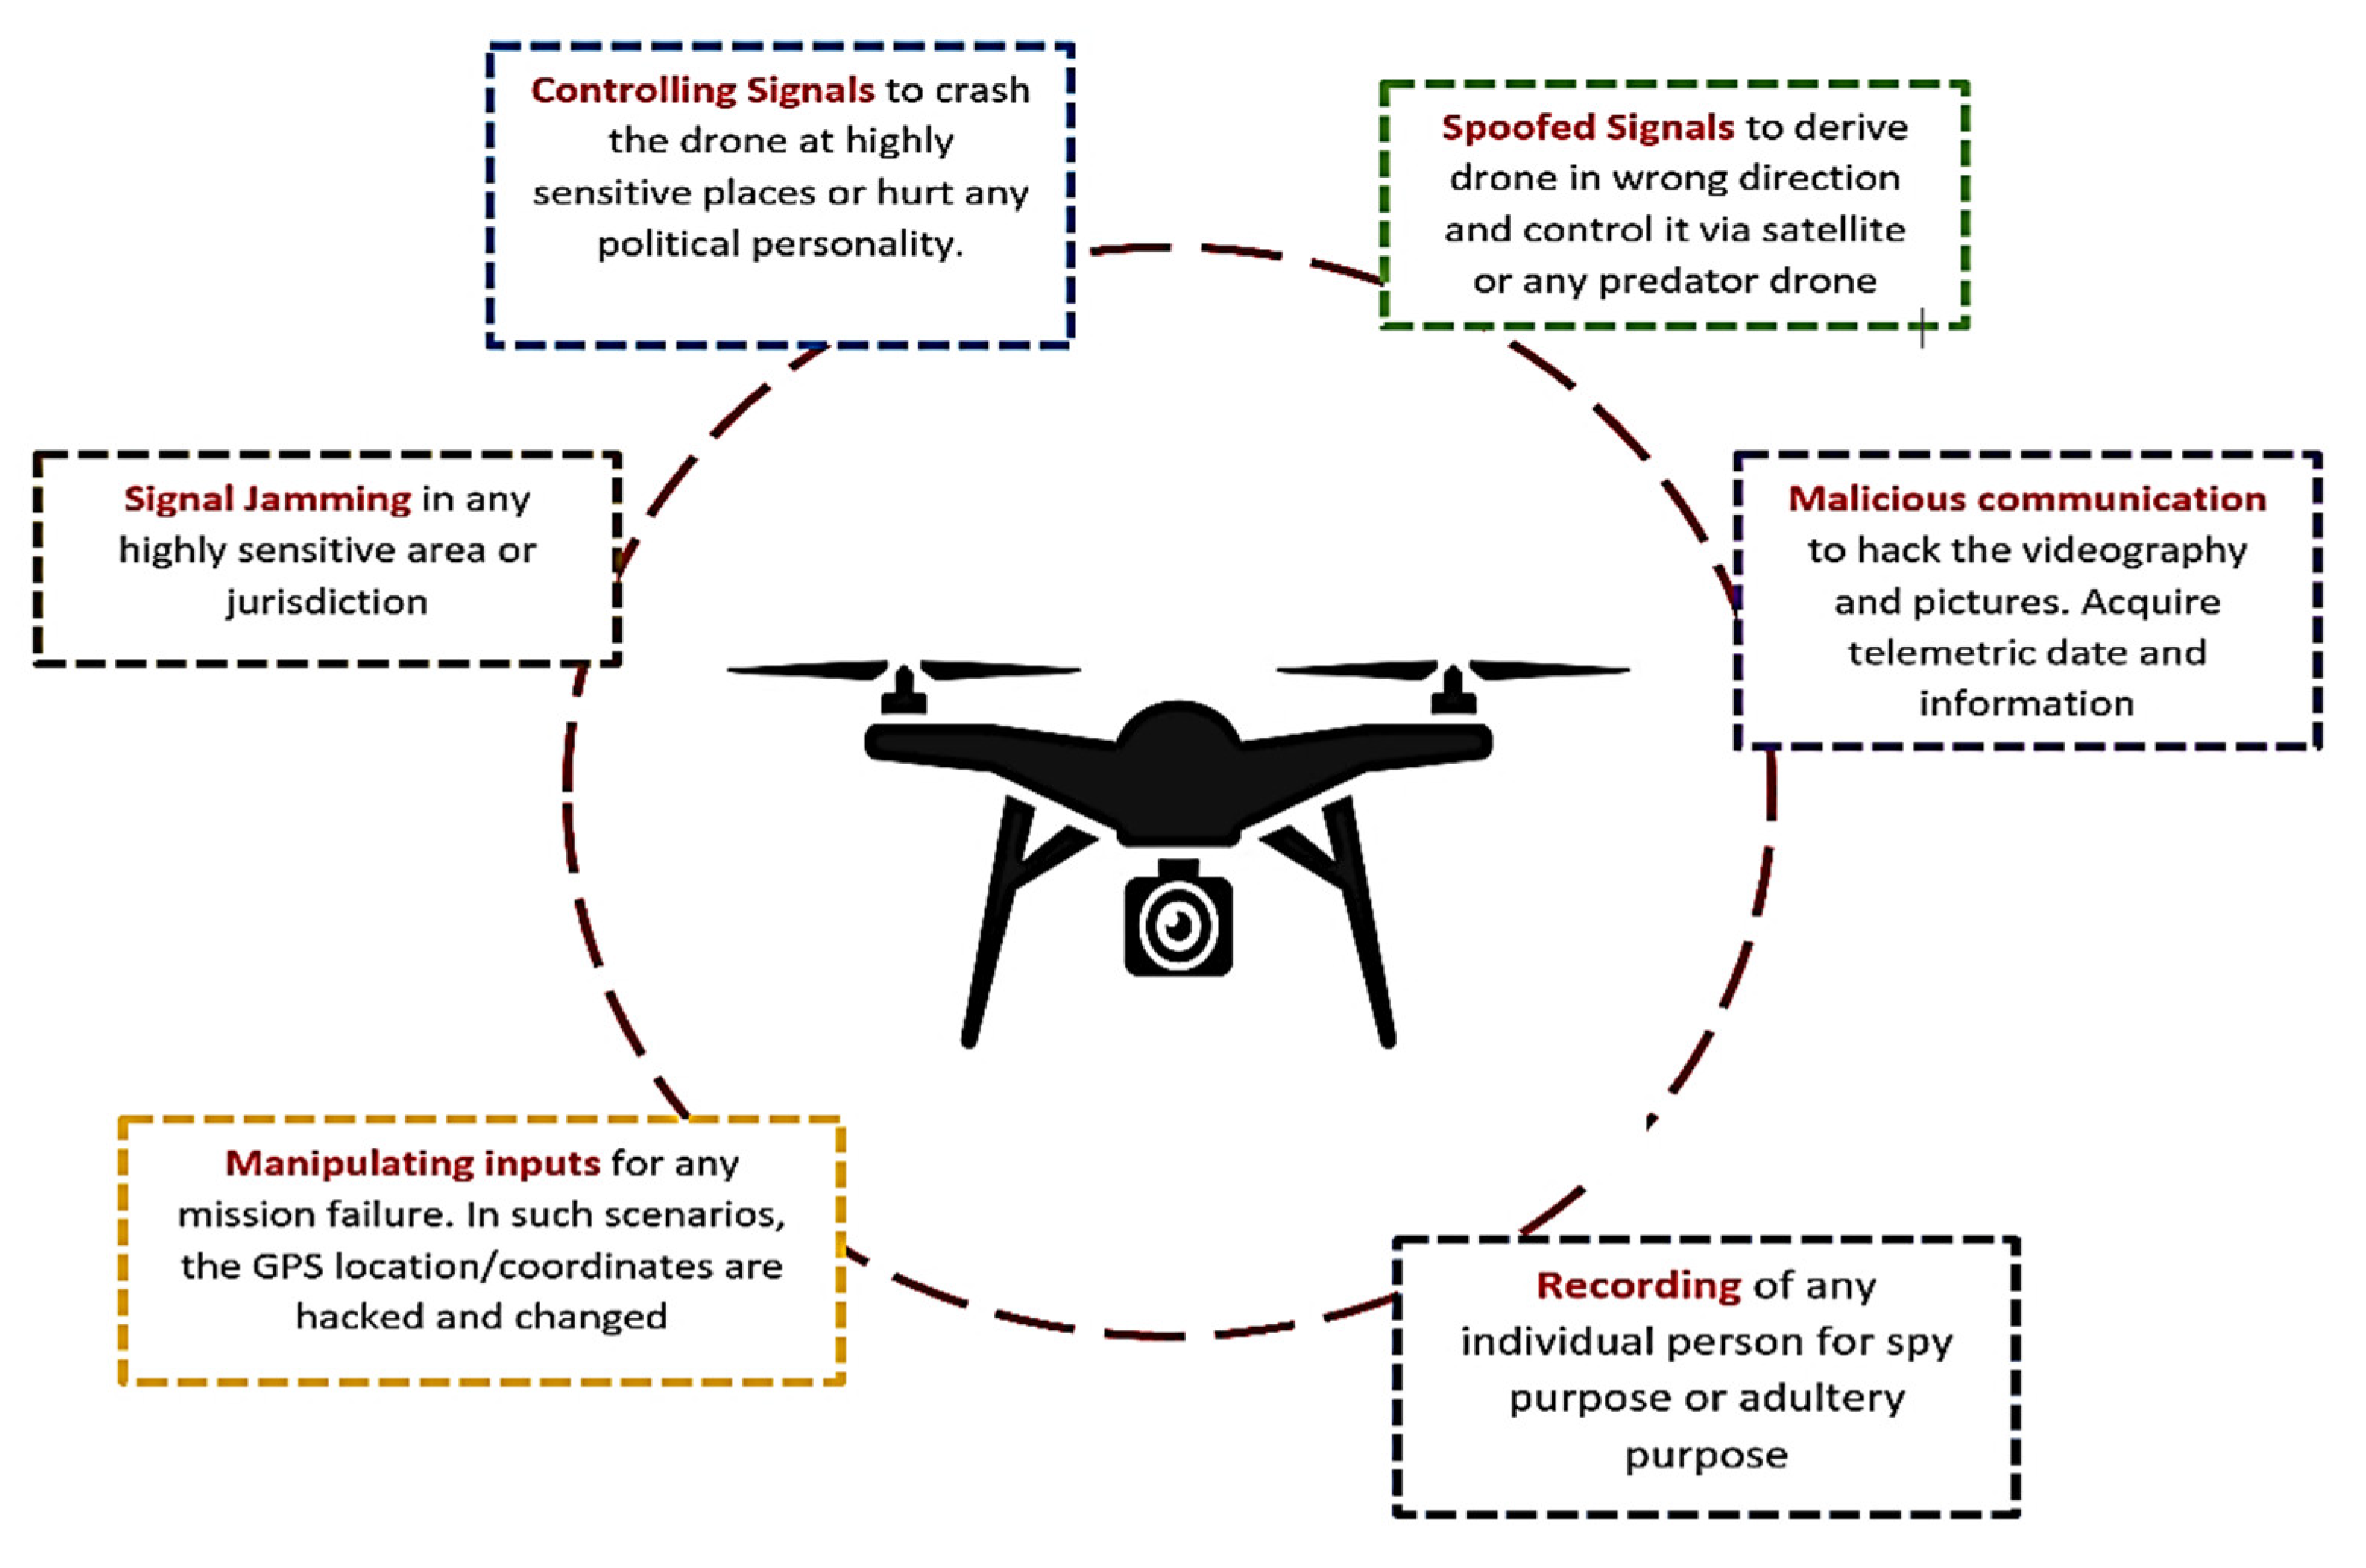 research paper on regulation of ai and drones in conflicts